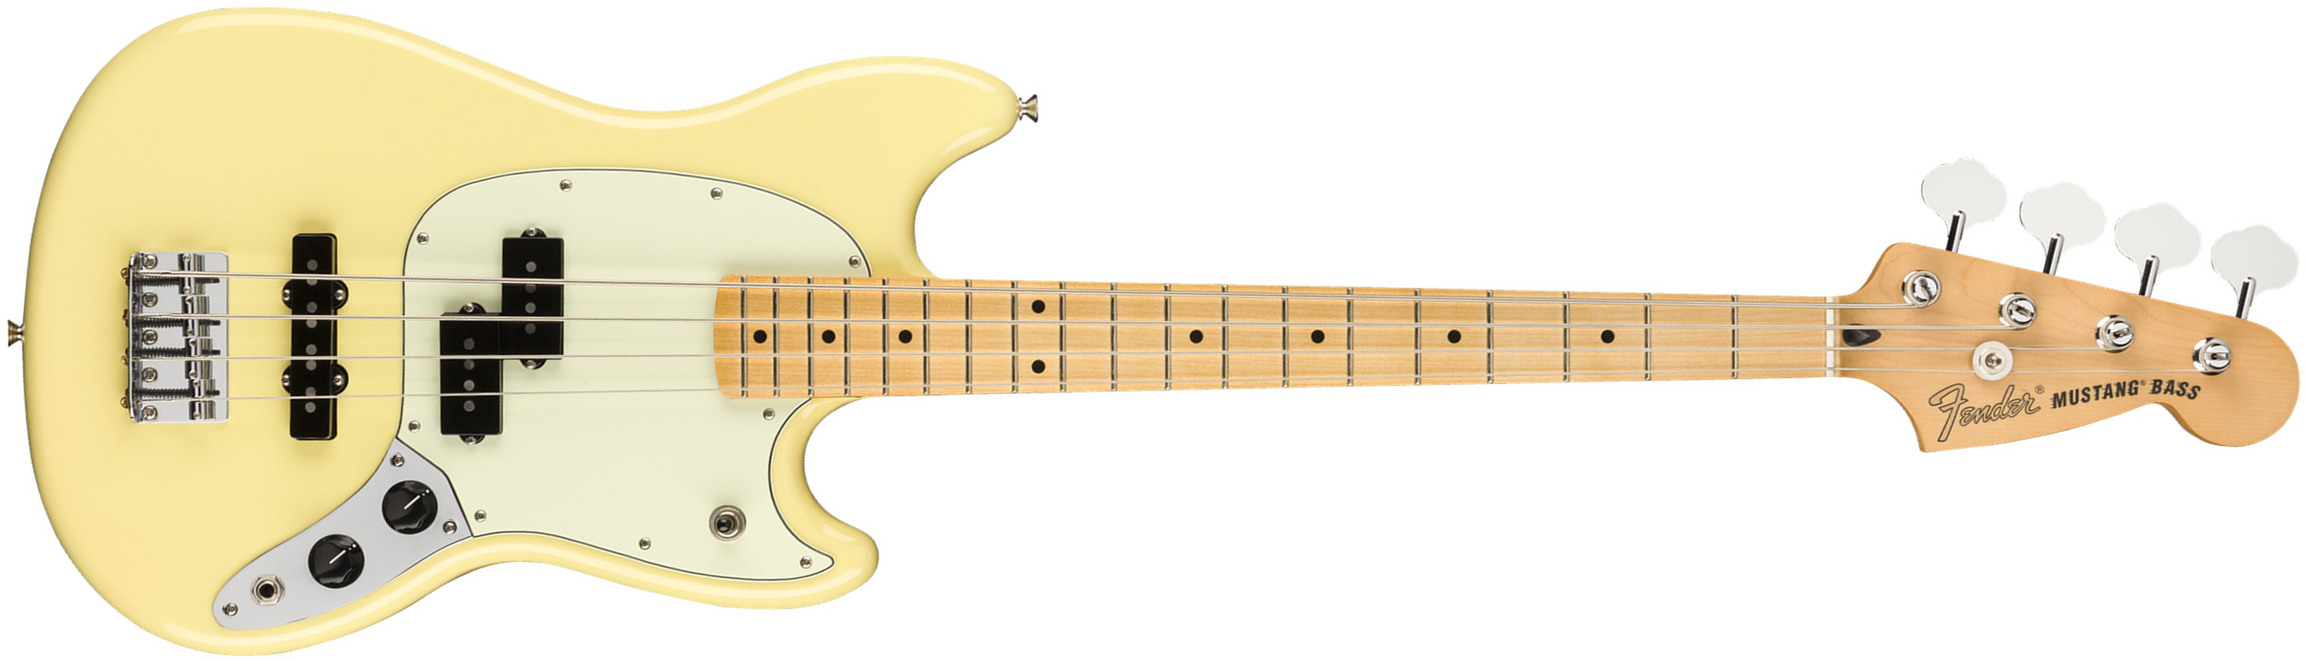 Fender Player Mustang Bass Pj Ltd Mex Mn - Canary - Solidbody E-bass - Main picture